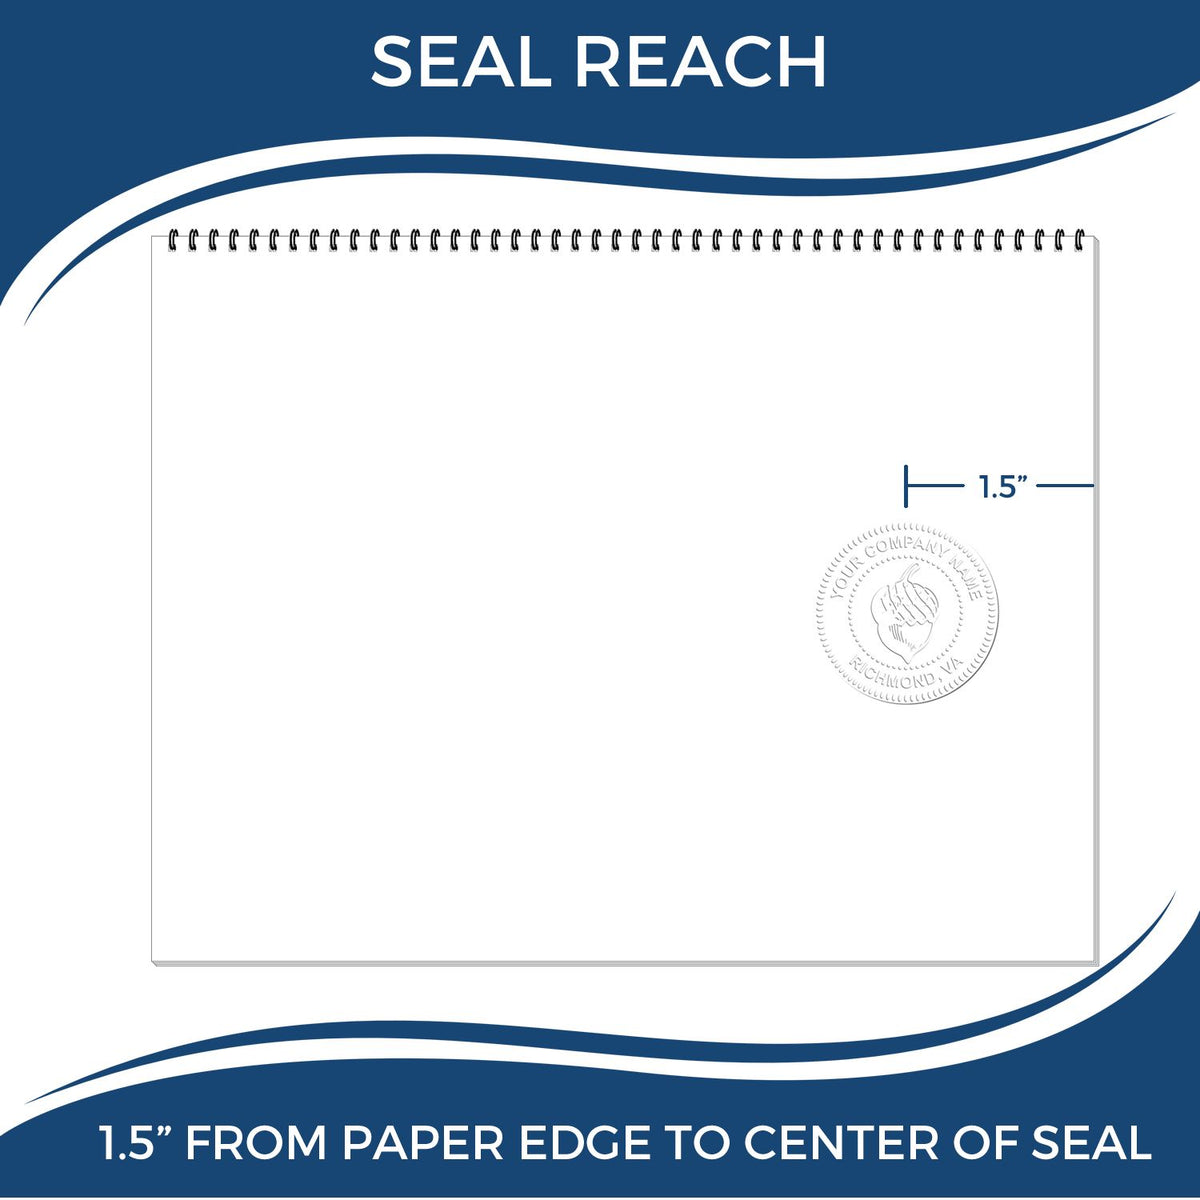 An infographic showing the seal reach which is represented by a ruler and a miniature seal image of the Handheld Connecticut Professional Engineer Embosser